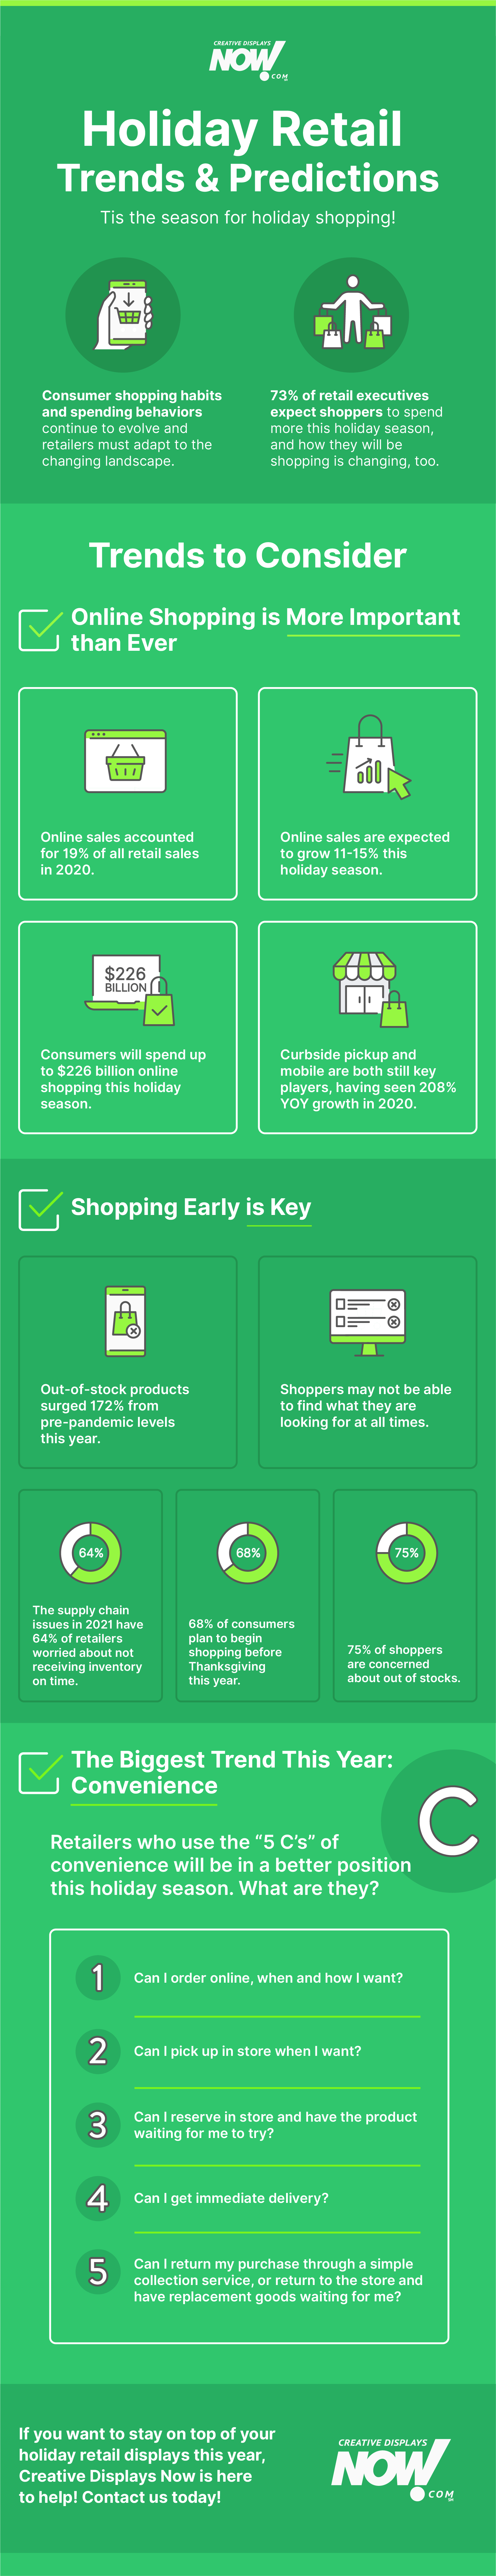 holiday retail trends & predictions